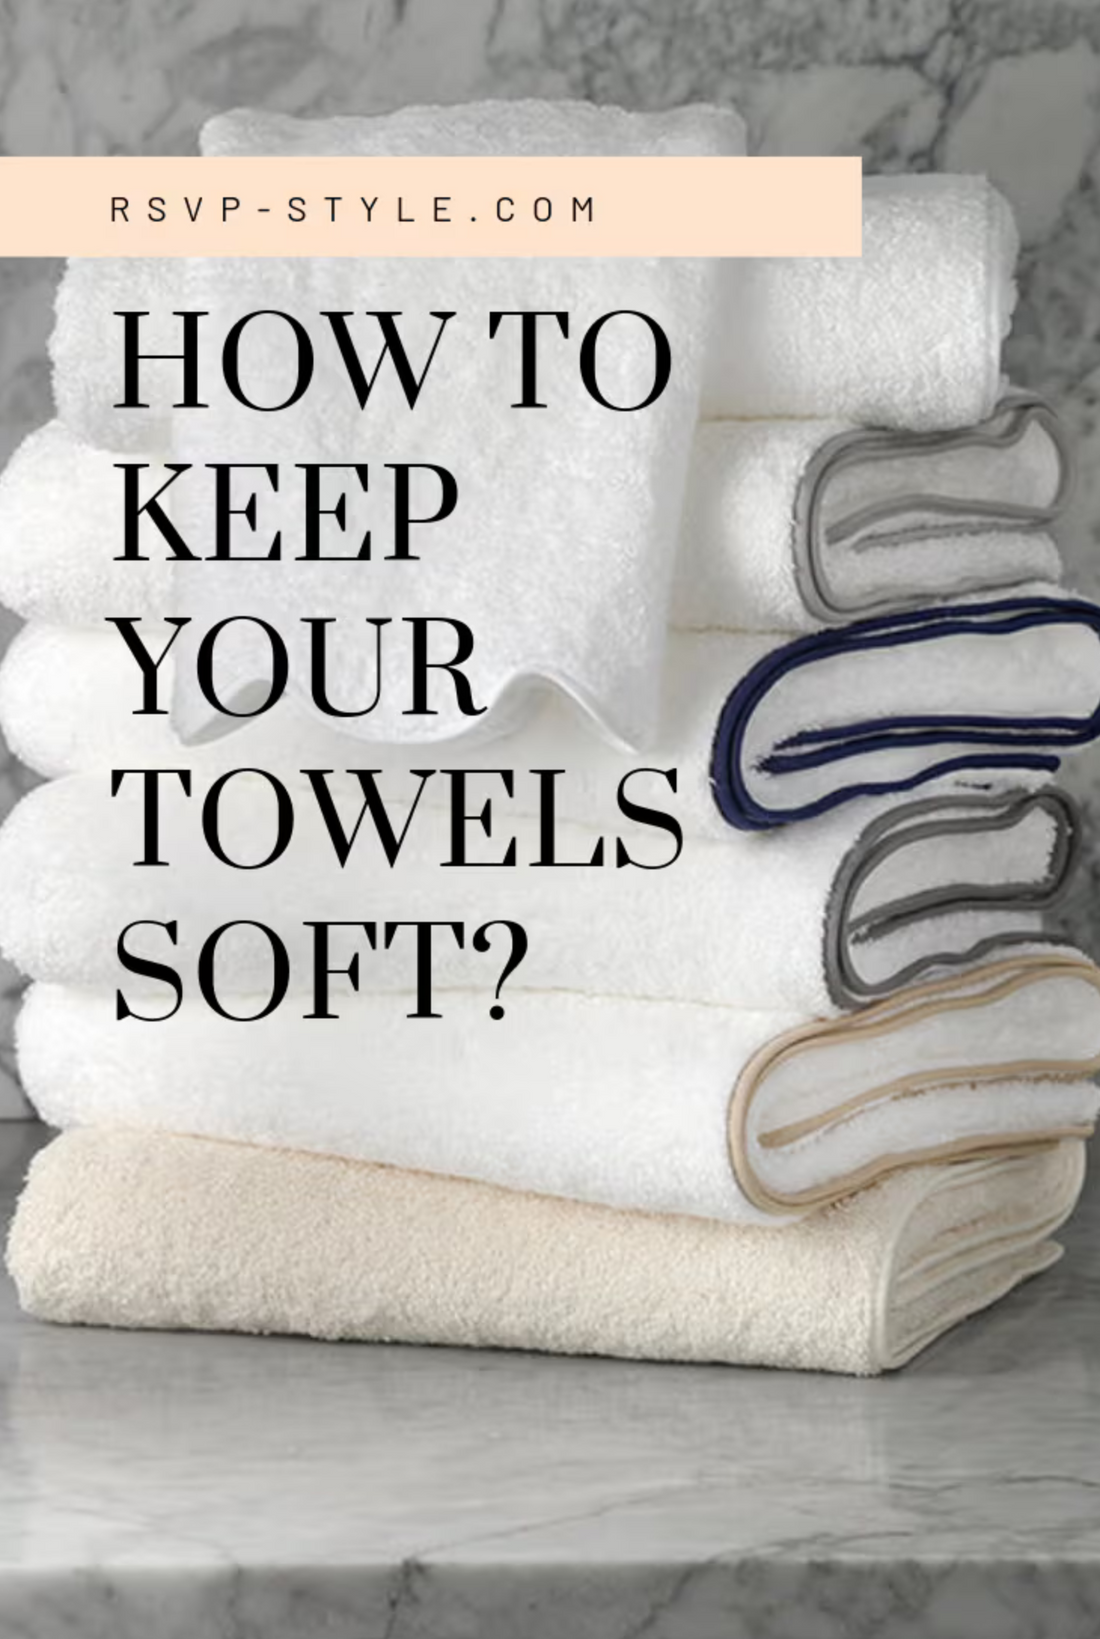 How To Keep Your Towels Soft & Pretty